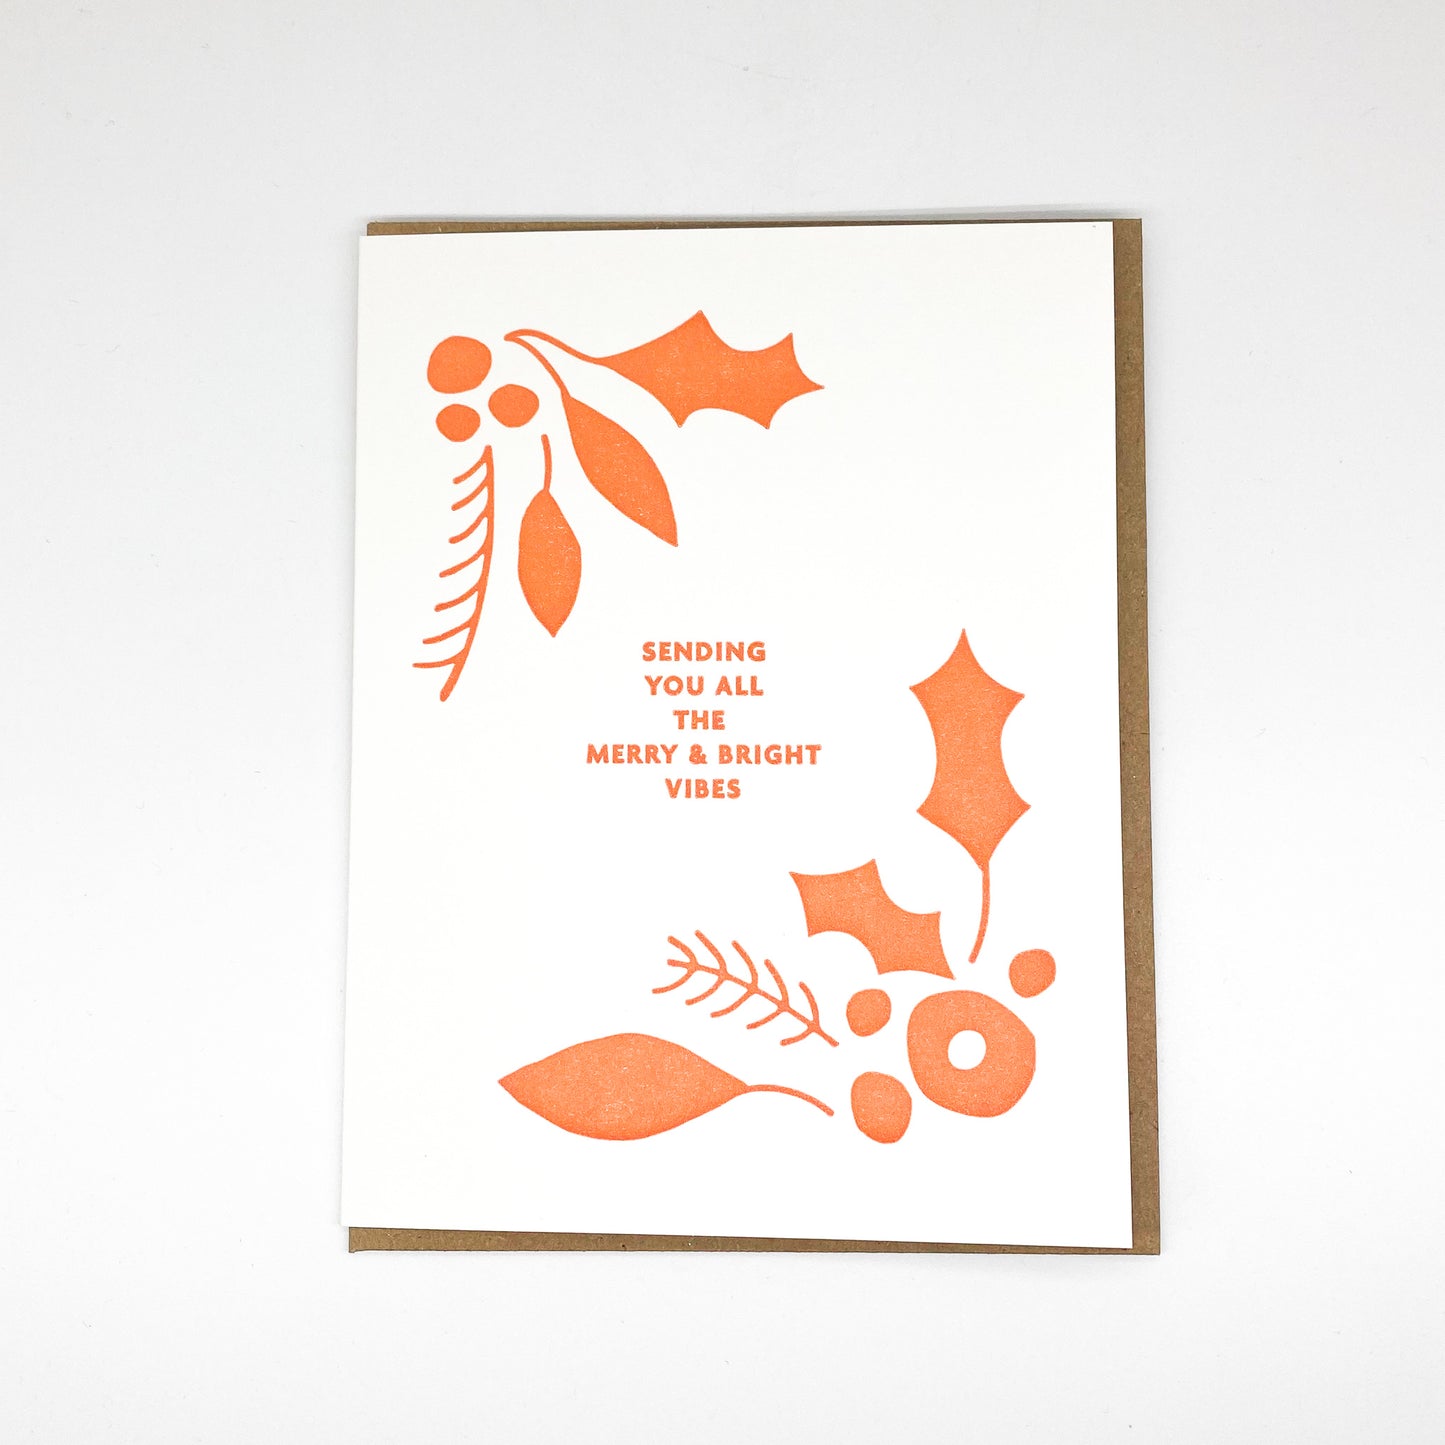 Merry Vibes Card